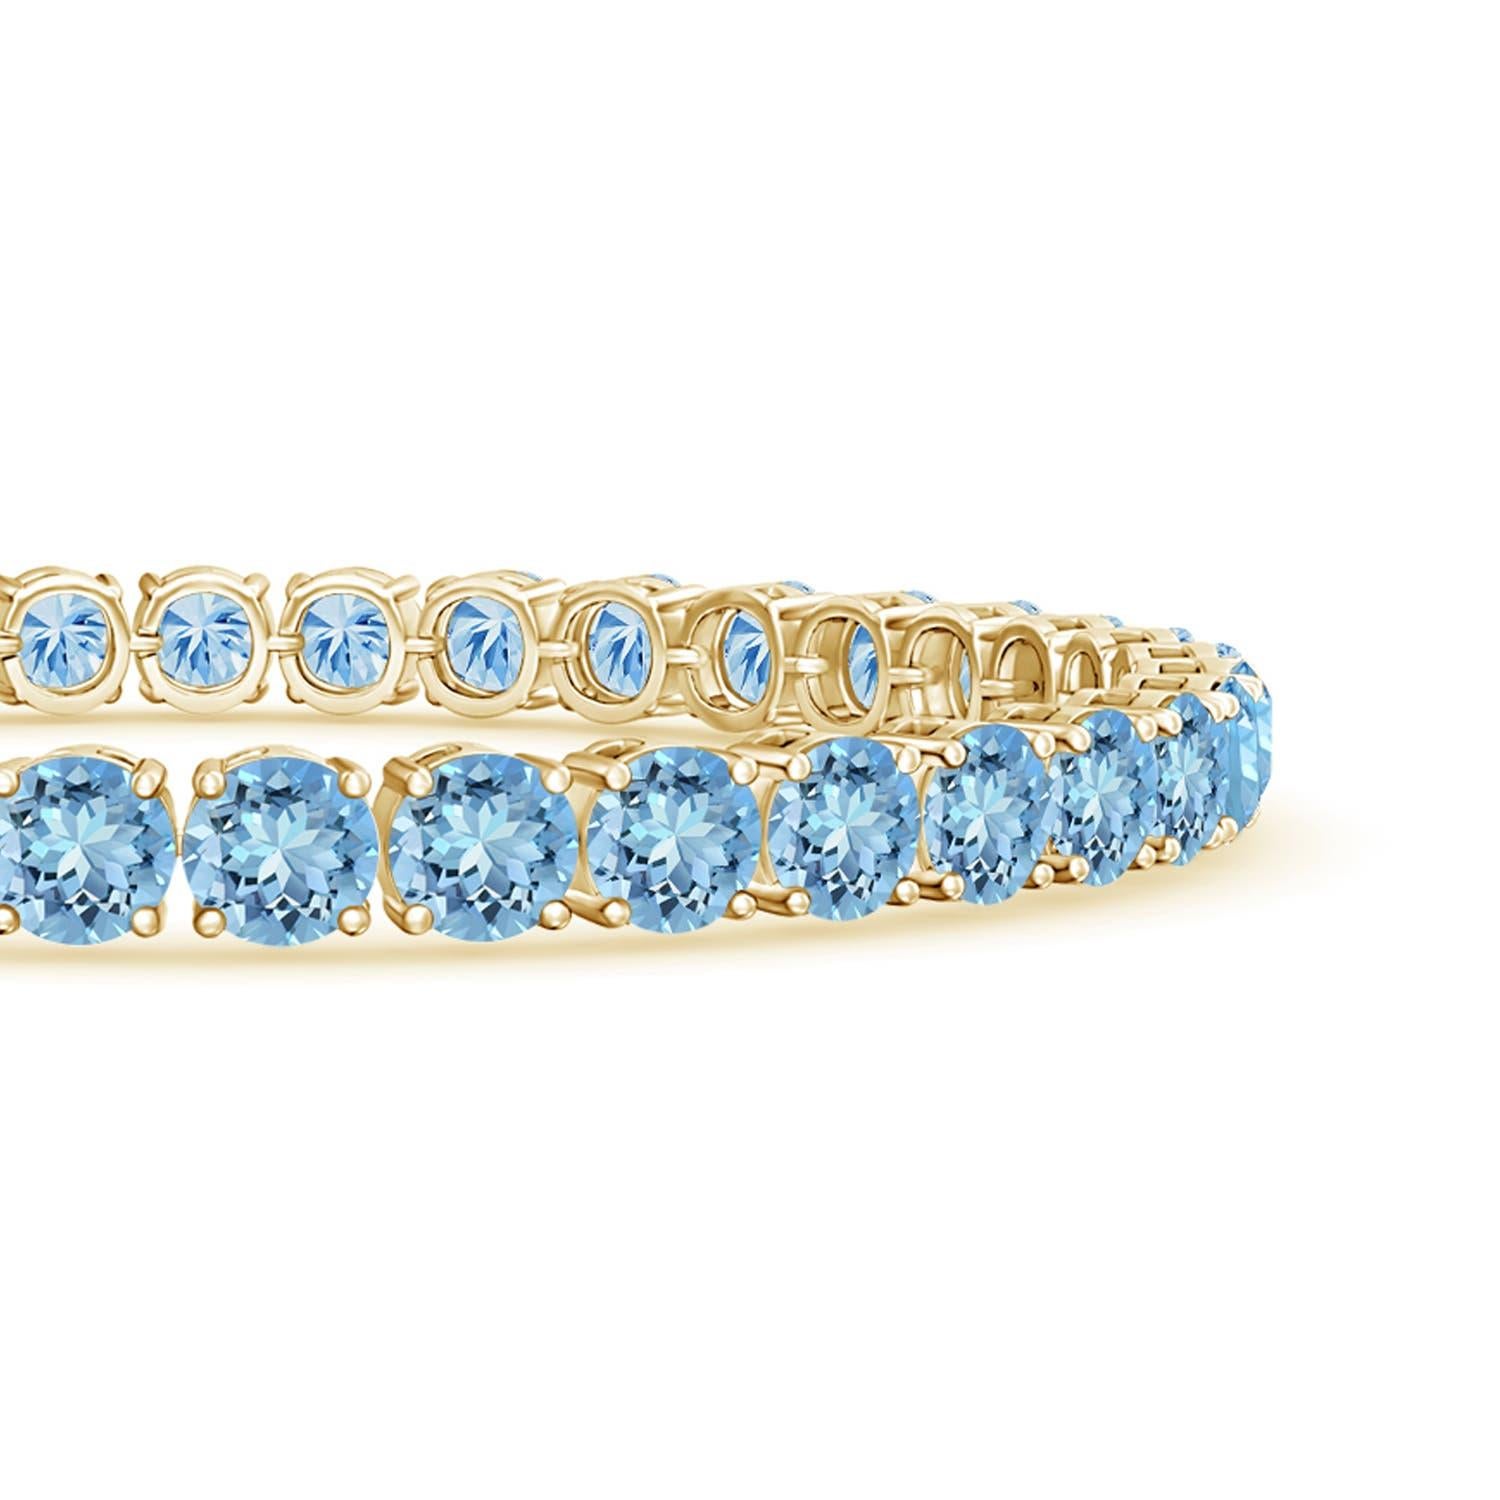 Simple yet so appealing, this tennis bracelet in 14k yellow gold is effortlessly elegant. The alternated round diamonds and icy blue aquamarines are secured in bezel settings.